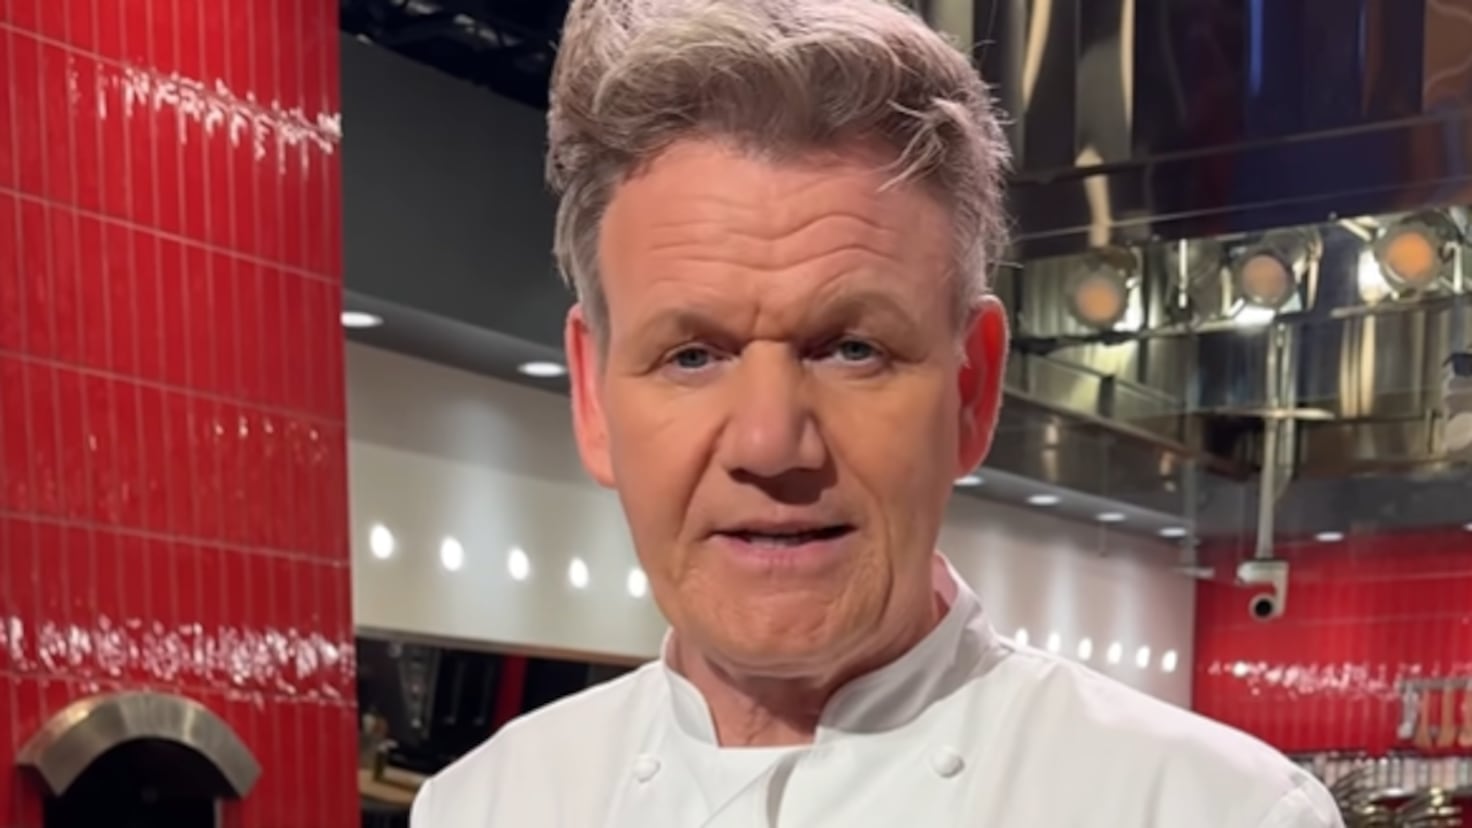 Chef Gordon Ramsay suffers a bicycle accident: The helmet saved my life